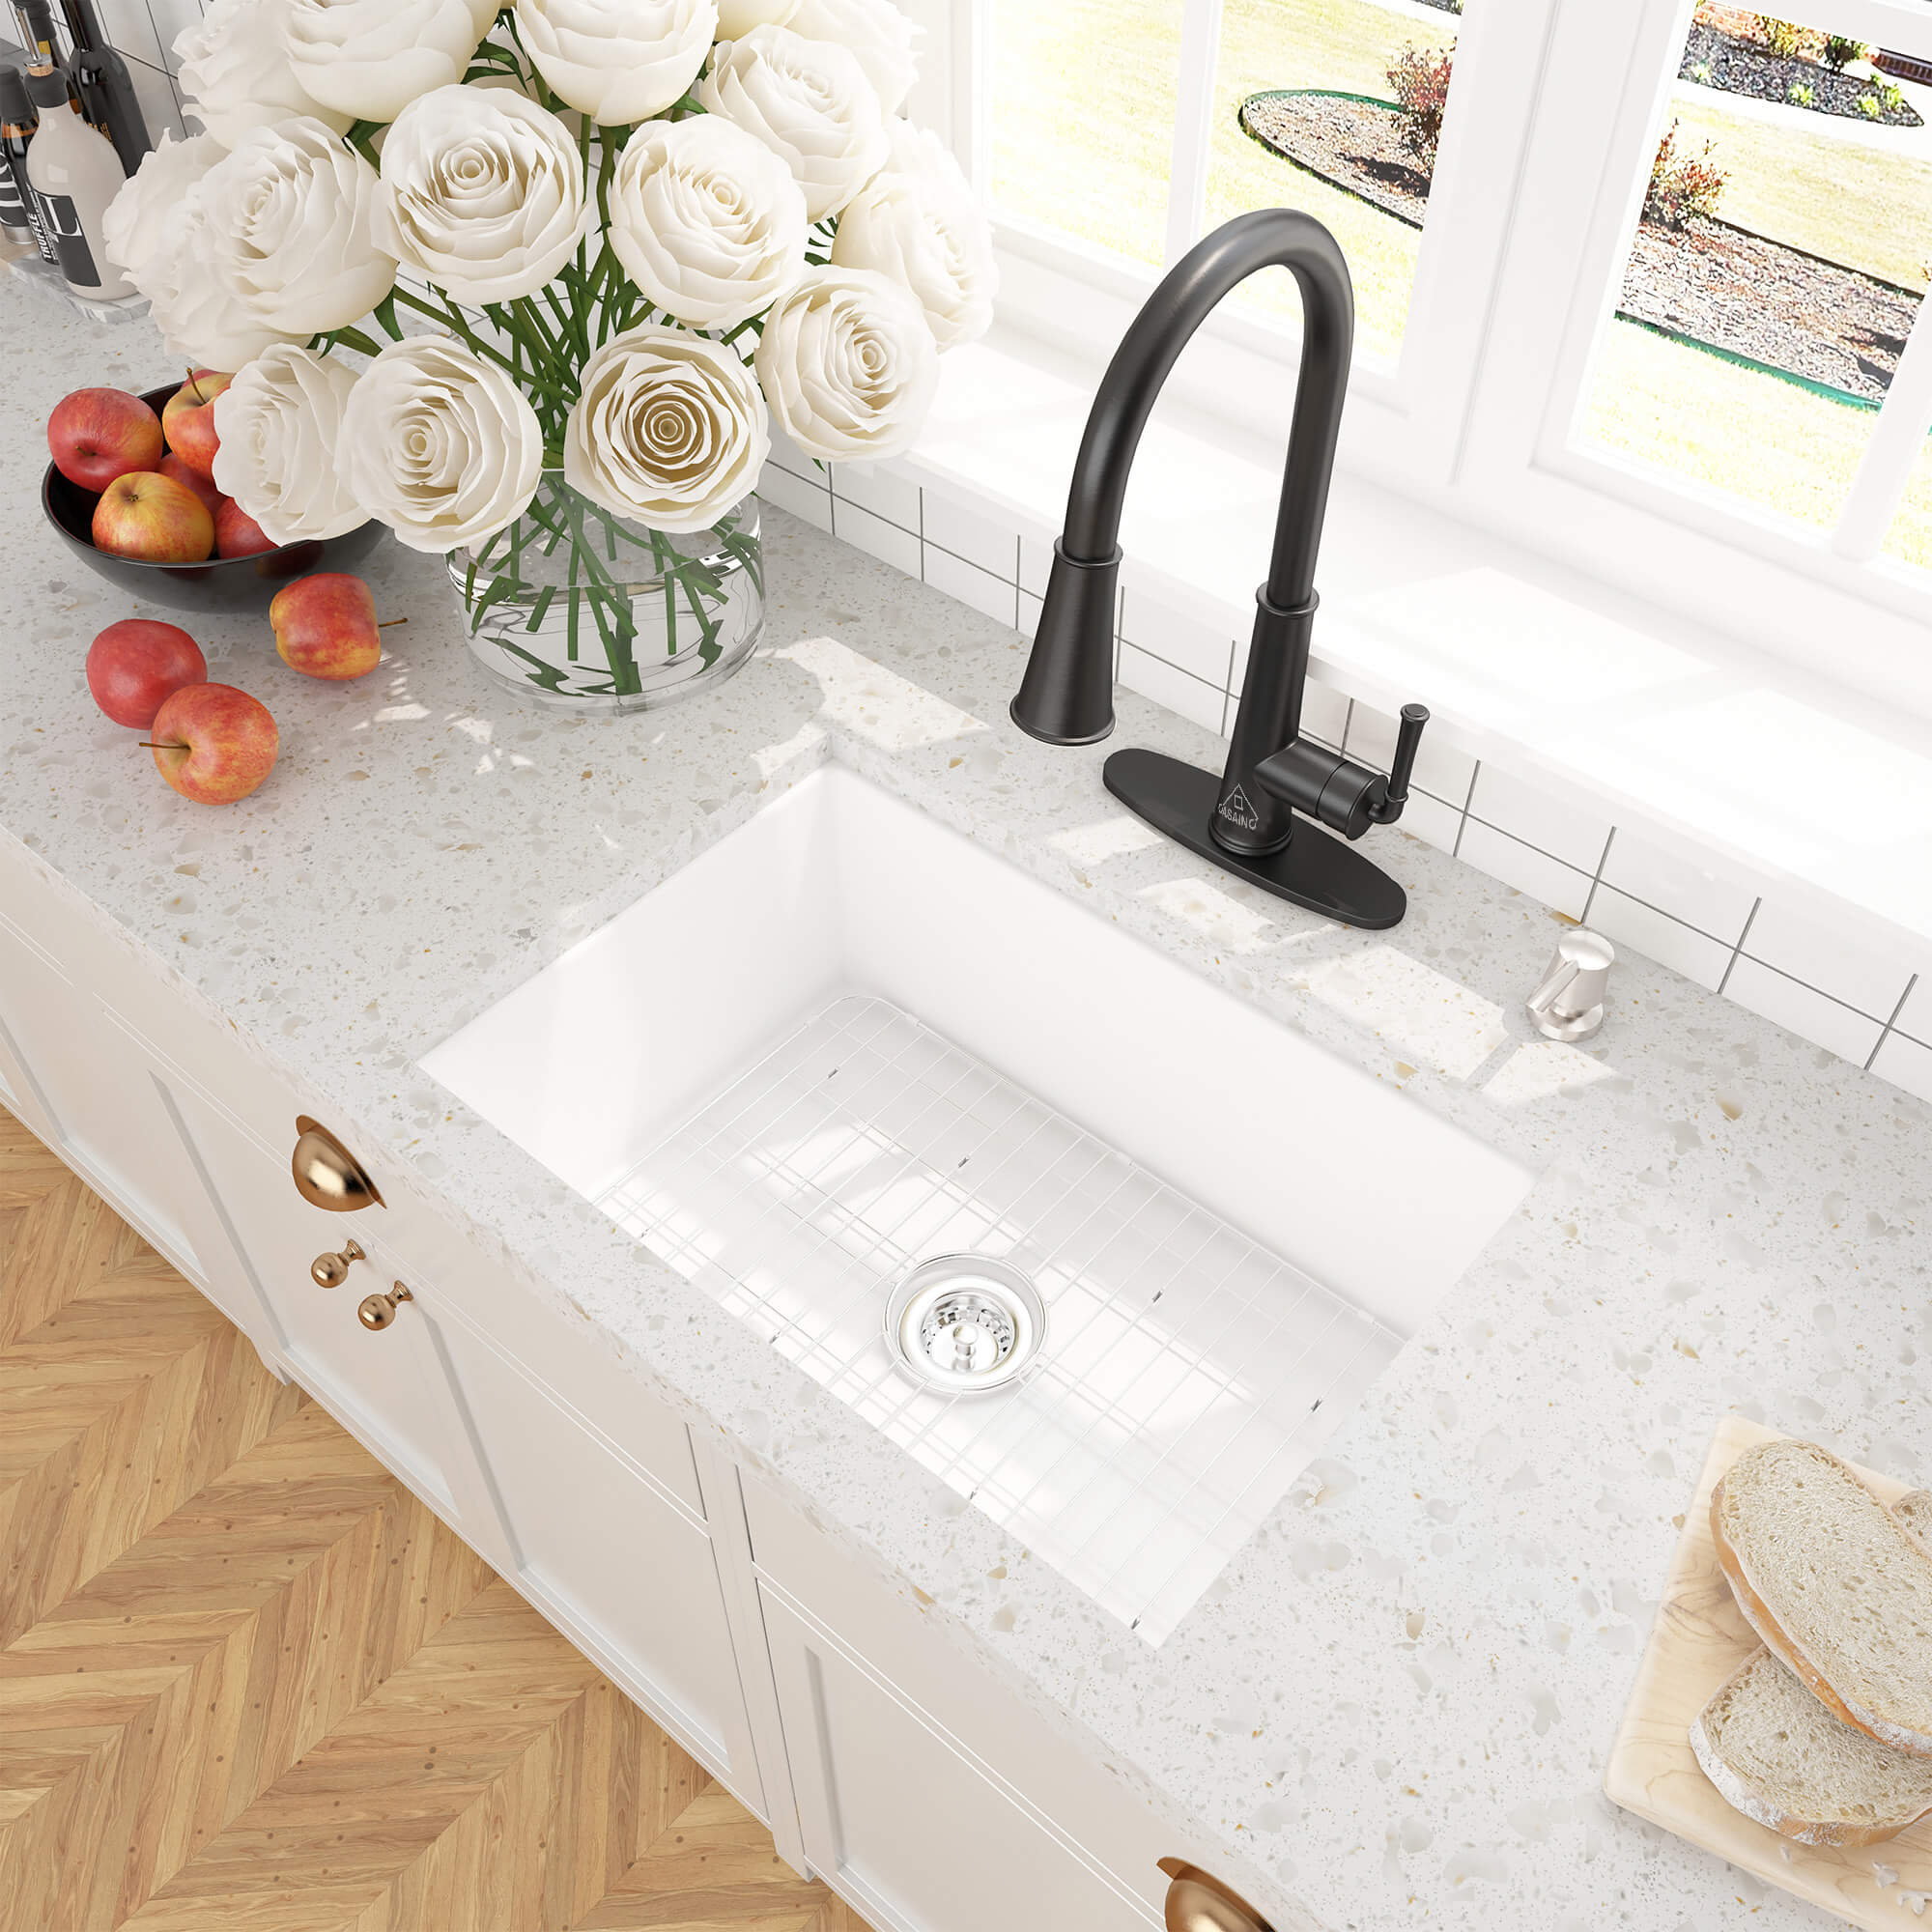 27 in. Undermount Single Bowl Fireclay Kitchen Sink with Grid and Drainer With cUPC Certified, in Glossy White/Matte Black/Matte Gray